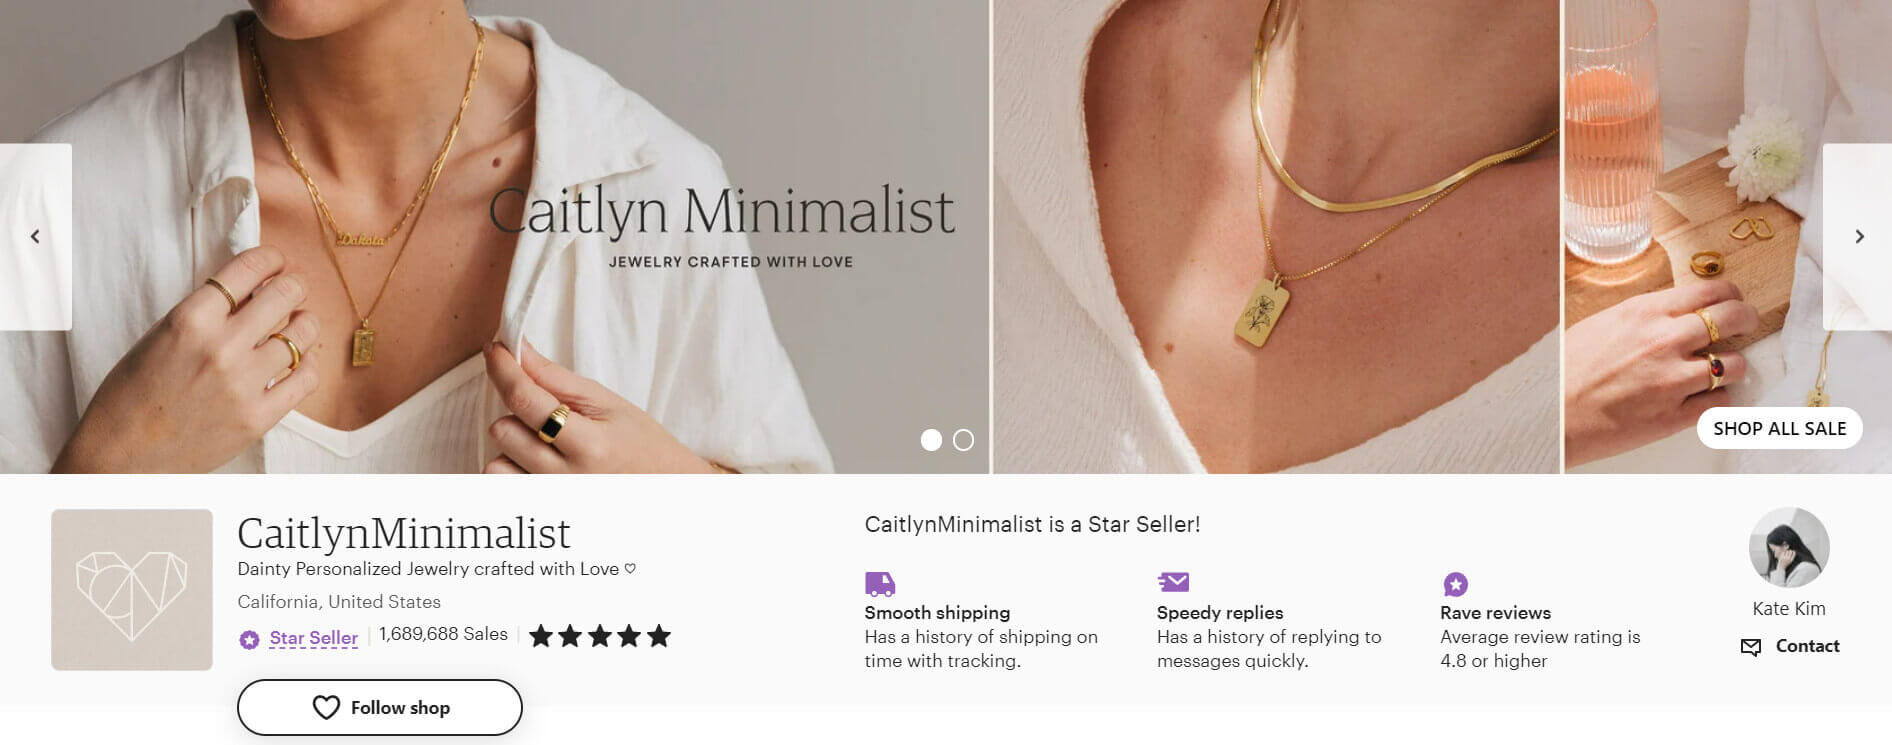 CaitlynMinimalist shows off the store's most popular personalized jewelry pieces